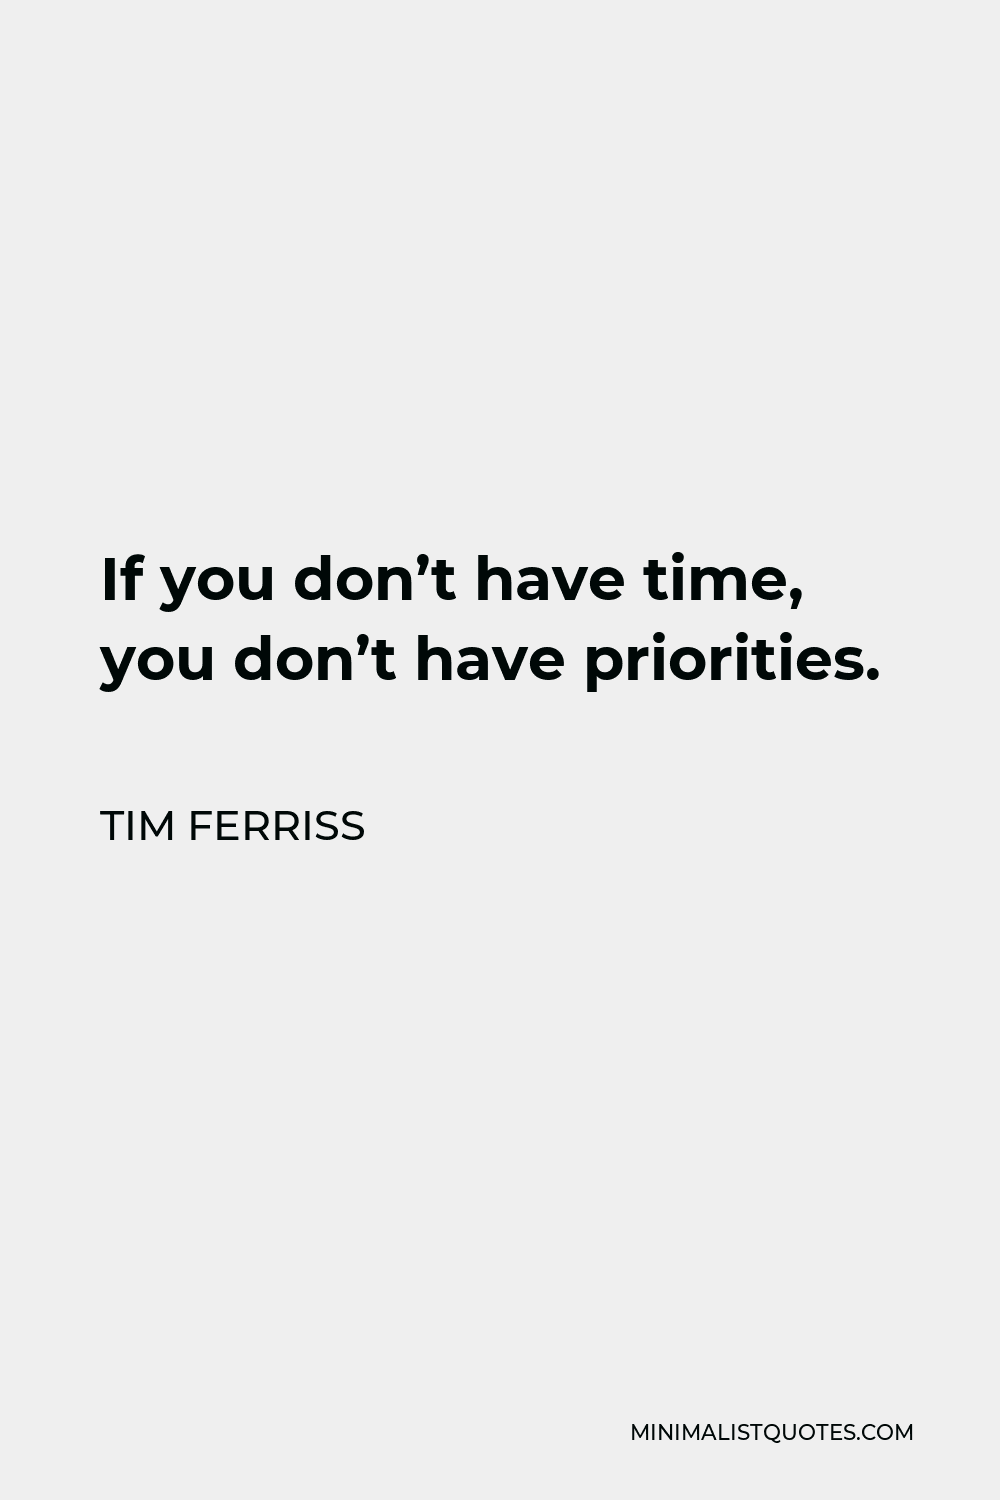 Tim Ferriss Quote - If you don’t have time, you don’t have priorities.